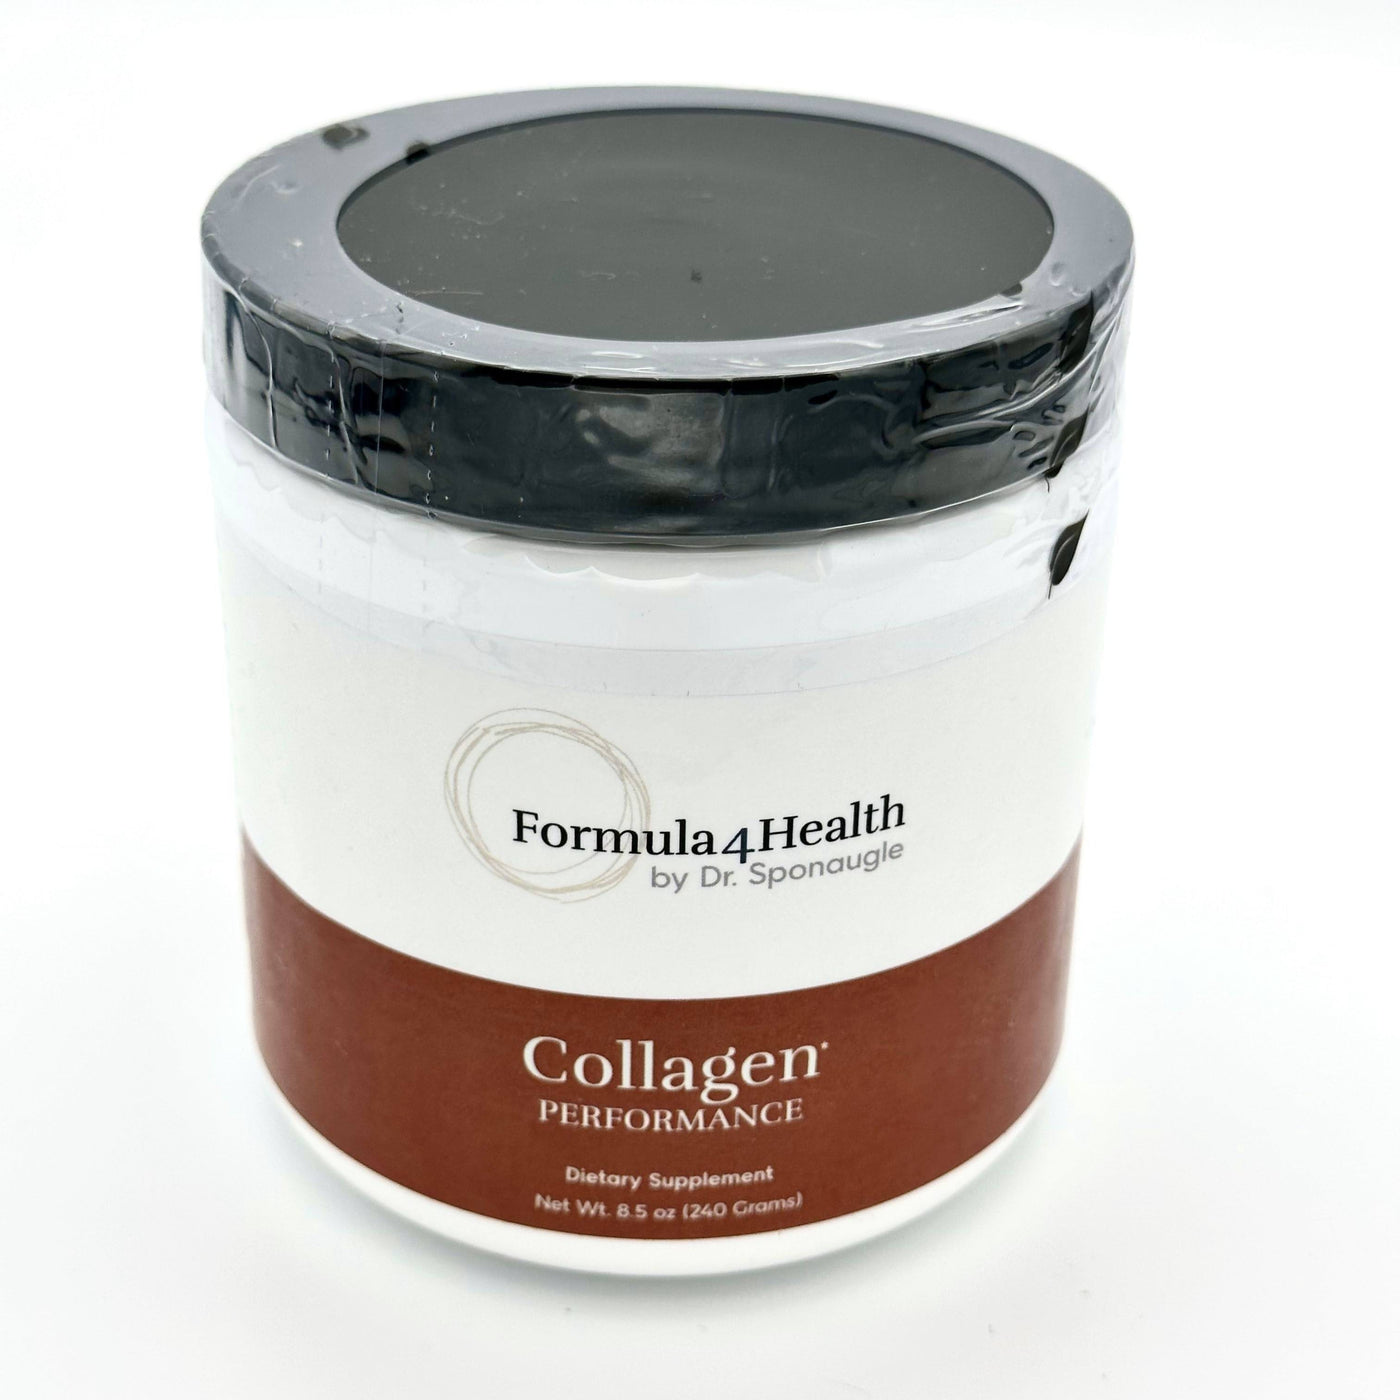 Collagen by  Formula 4 Health. Available for online purchase at  Formula For Health.